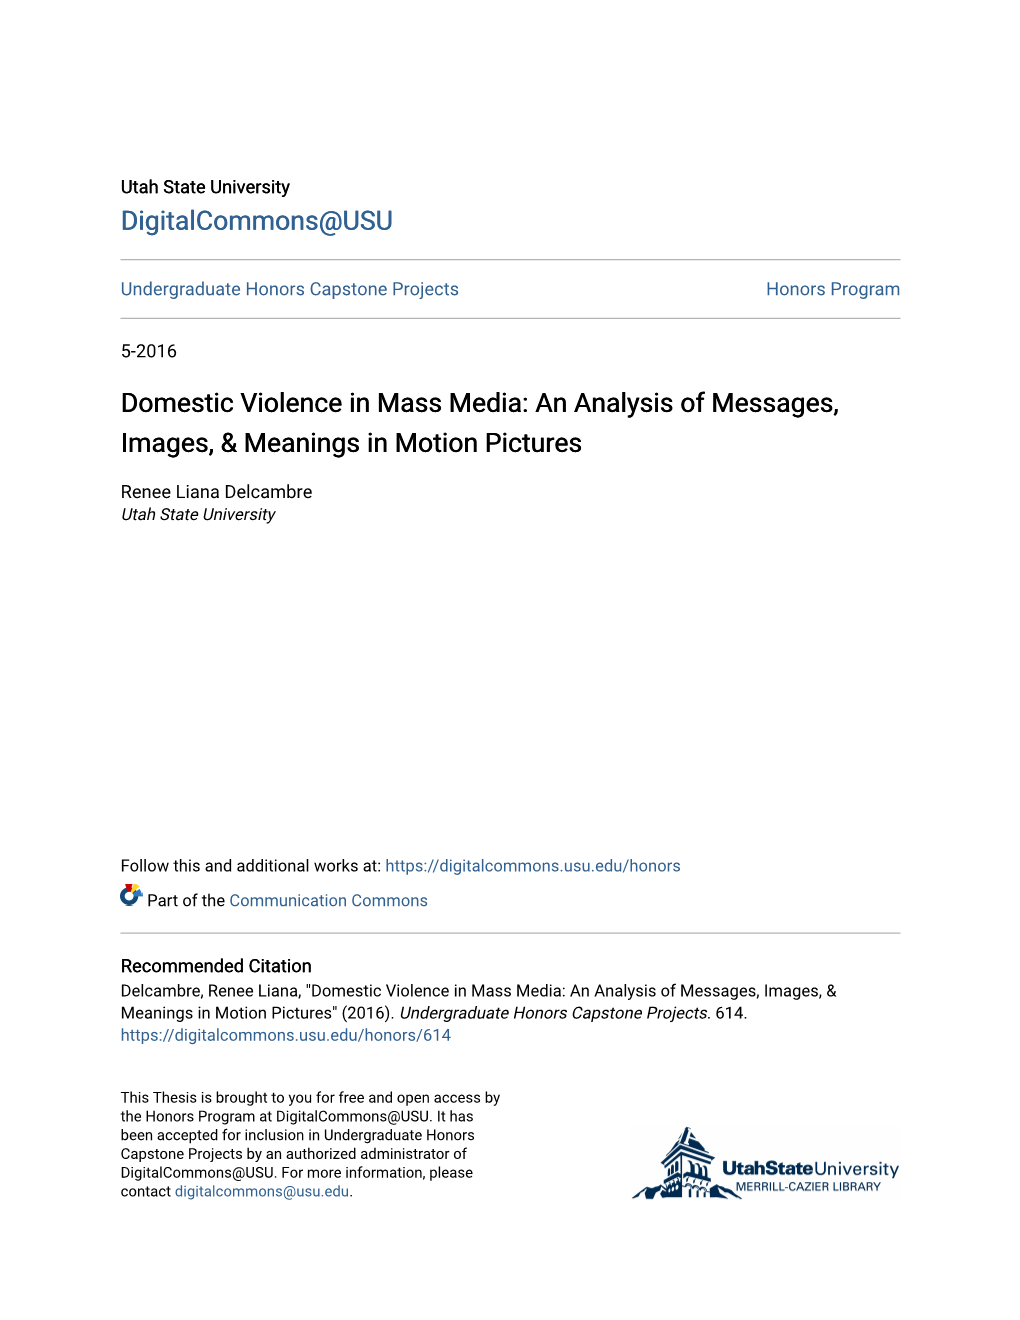 Domestic Violence in Mass Media: an Analysis of Messages, Images, & Meanings in Motion Pictures